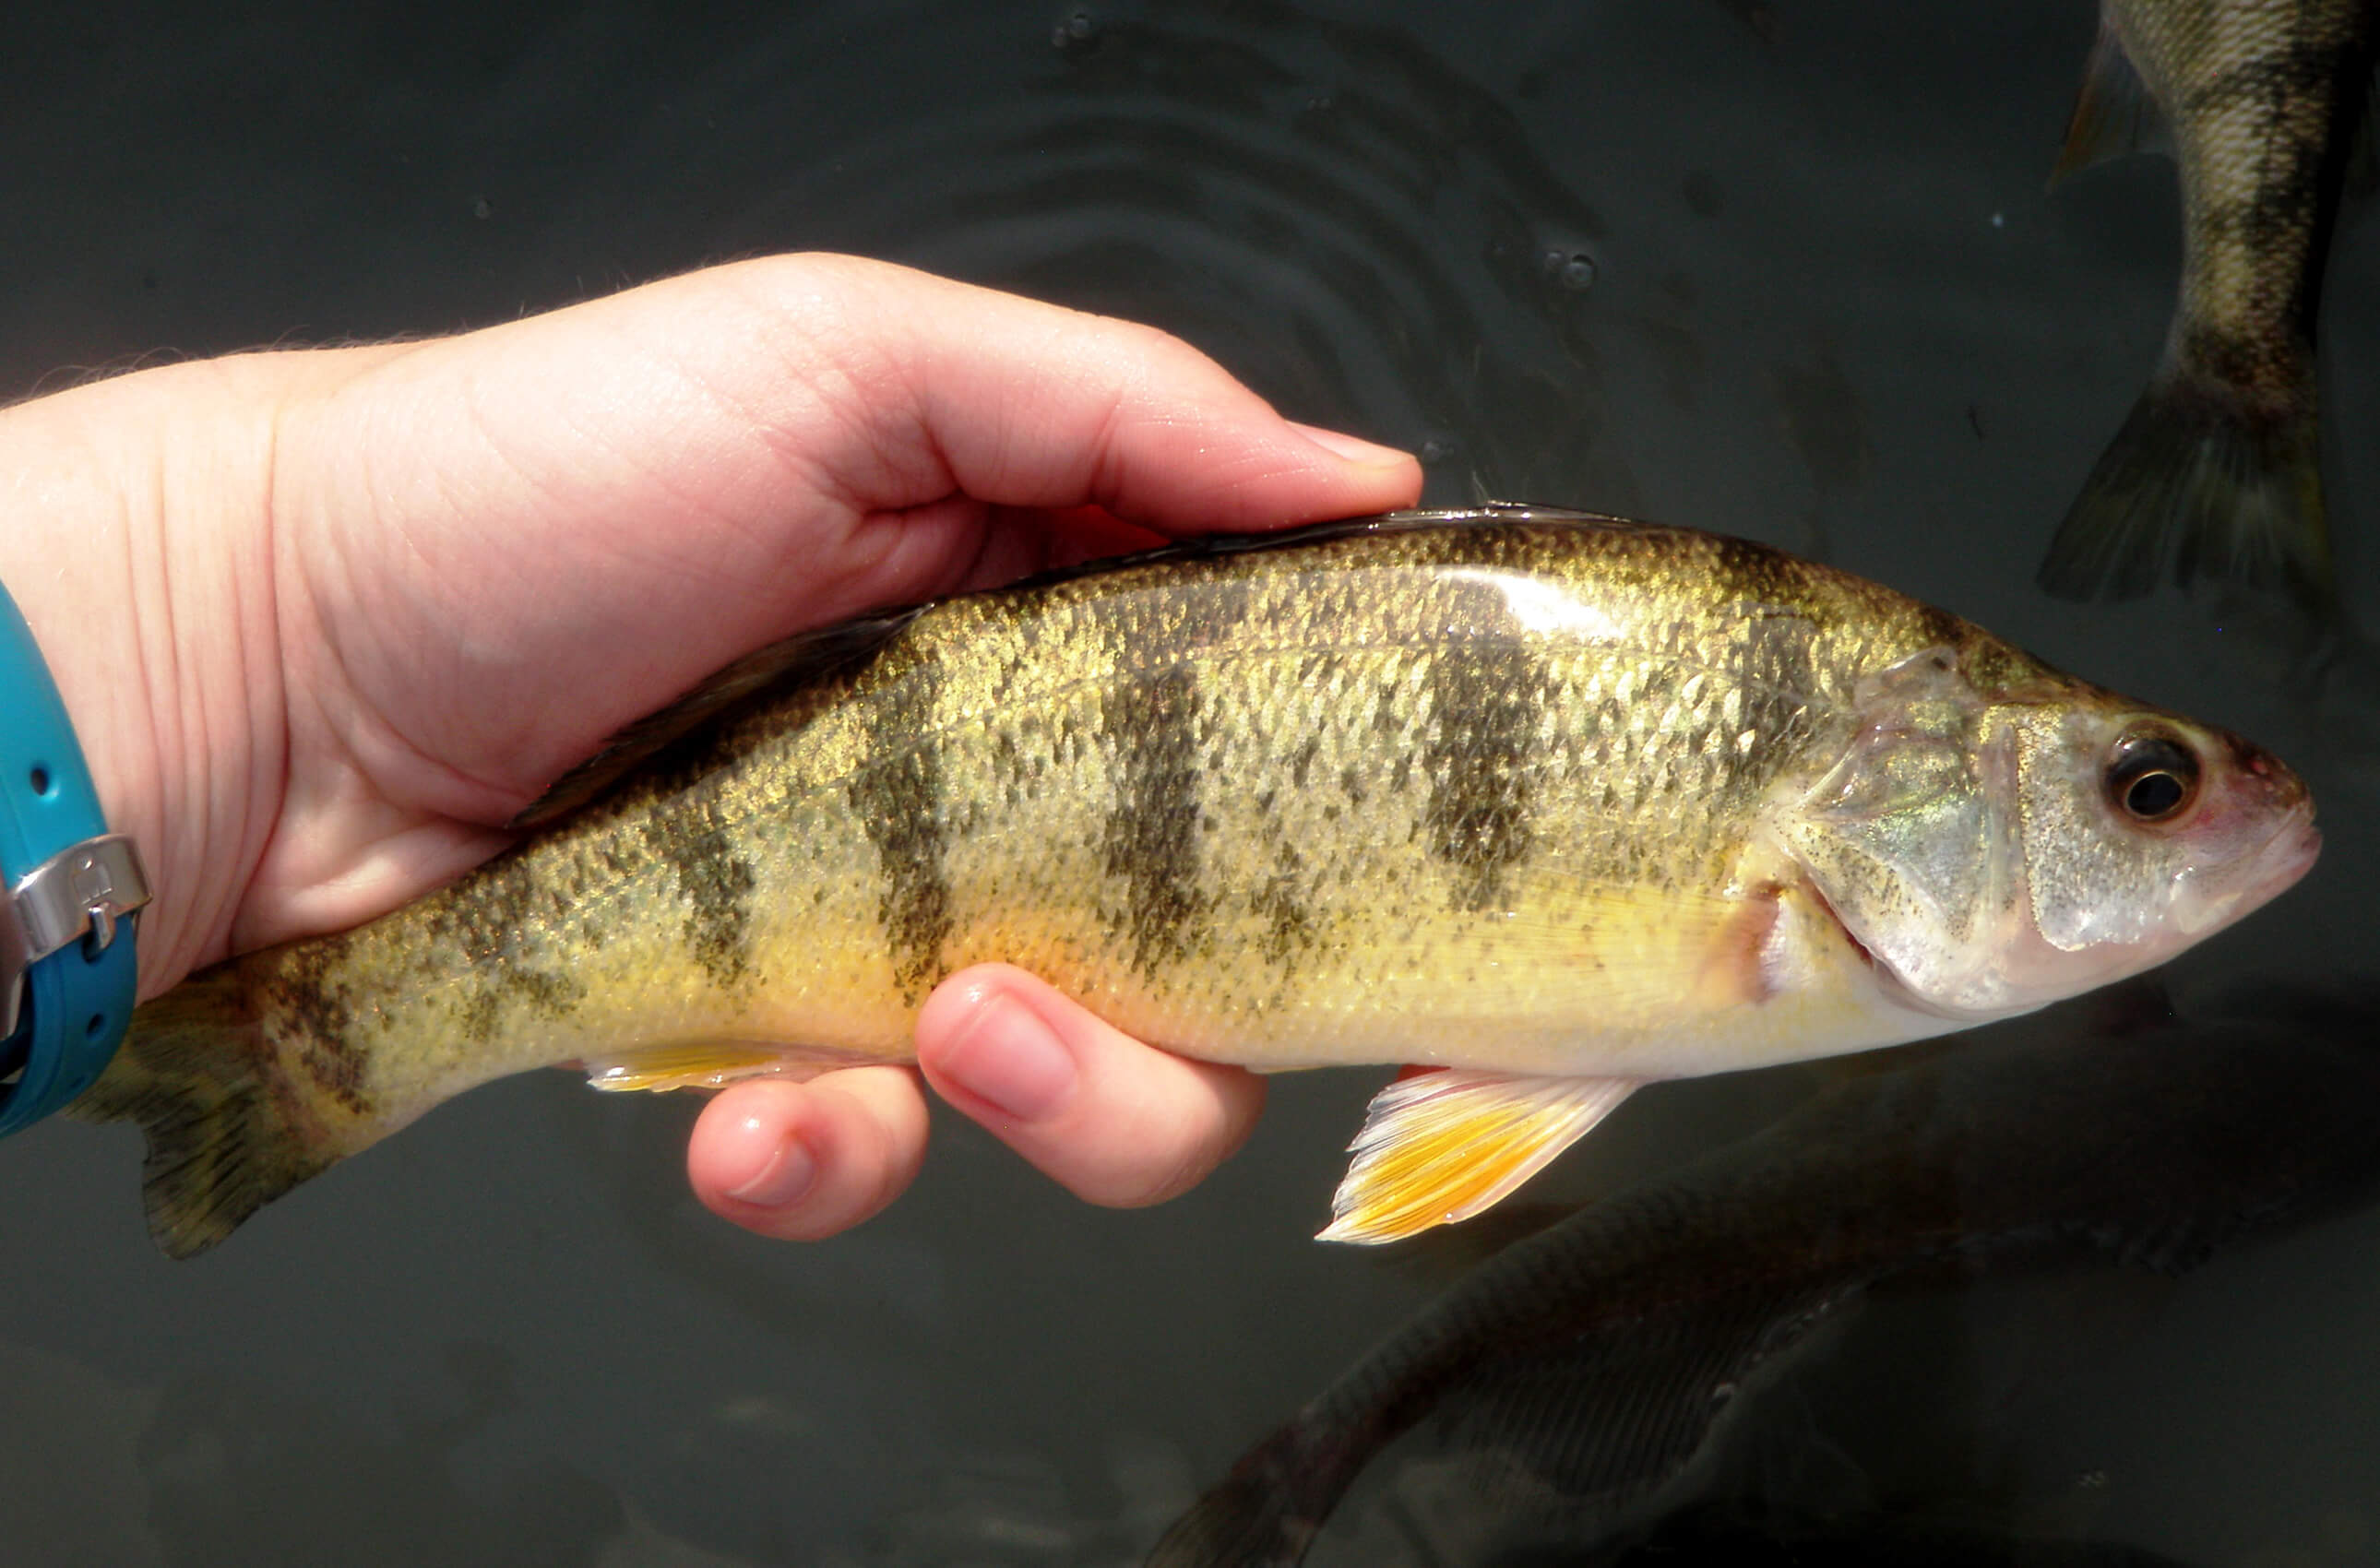 Surprise finding Lake Michigan perch quickly changed course of